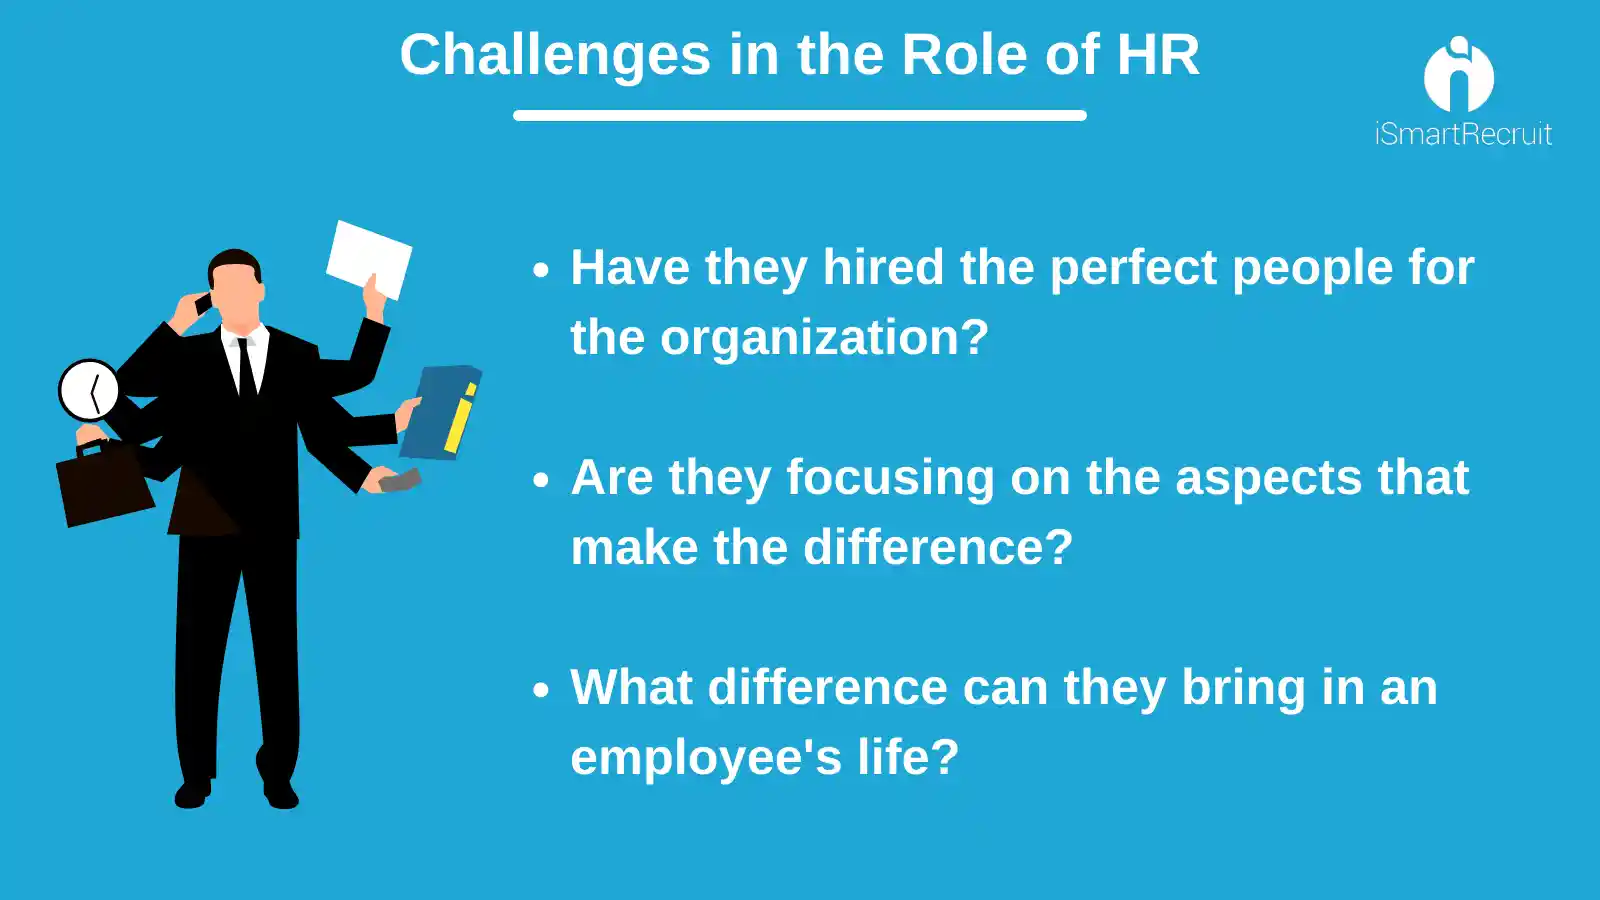 challenges in the role of HR